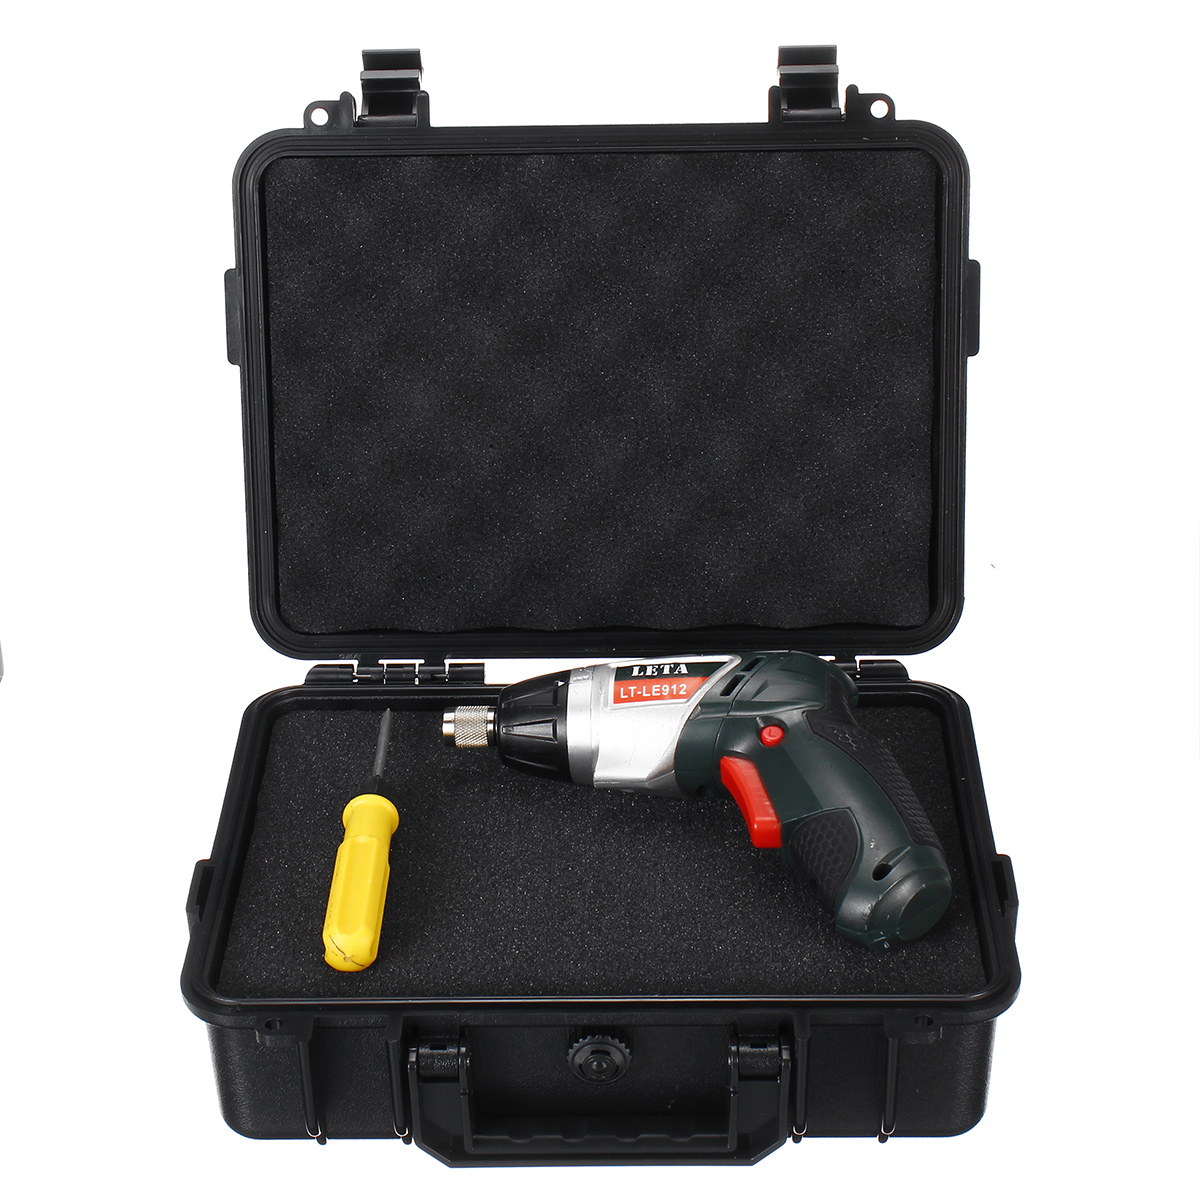 Outdoor-Portable-EDC-Instrument-Tool-Kits-Box-Waterproof-Shockproof-Protective-Safety-Storage-Case-1553948-8